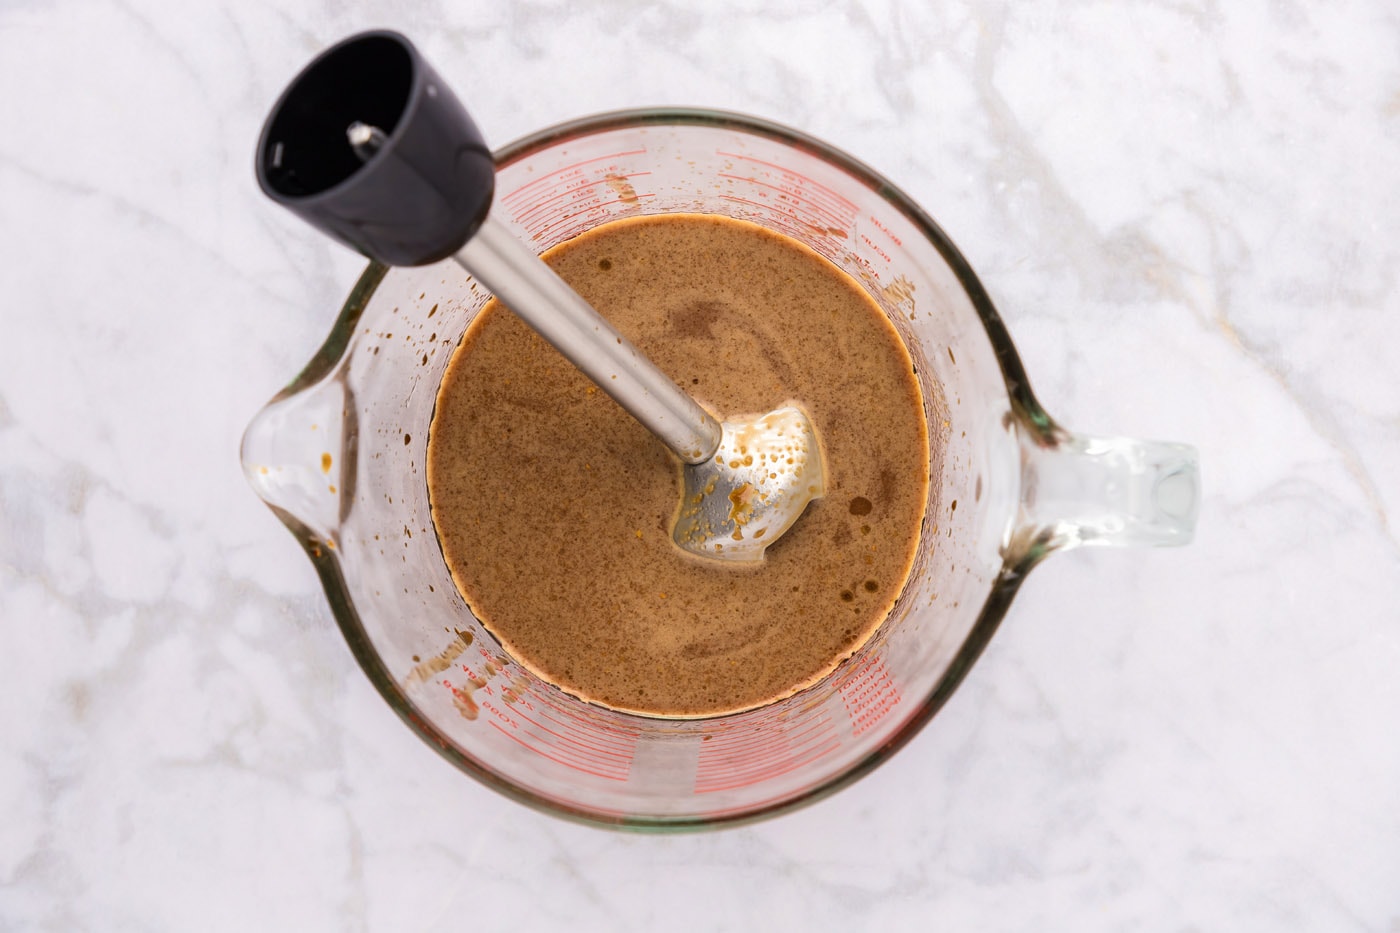 teriyaki sauce ingredients in a cup with an immersion blender